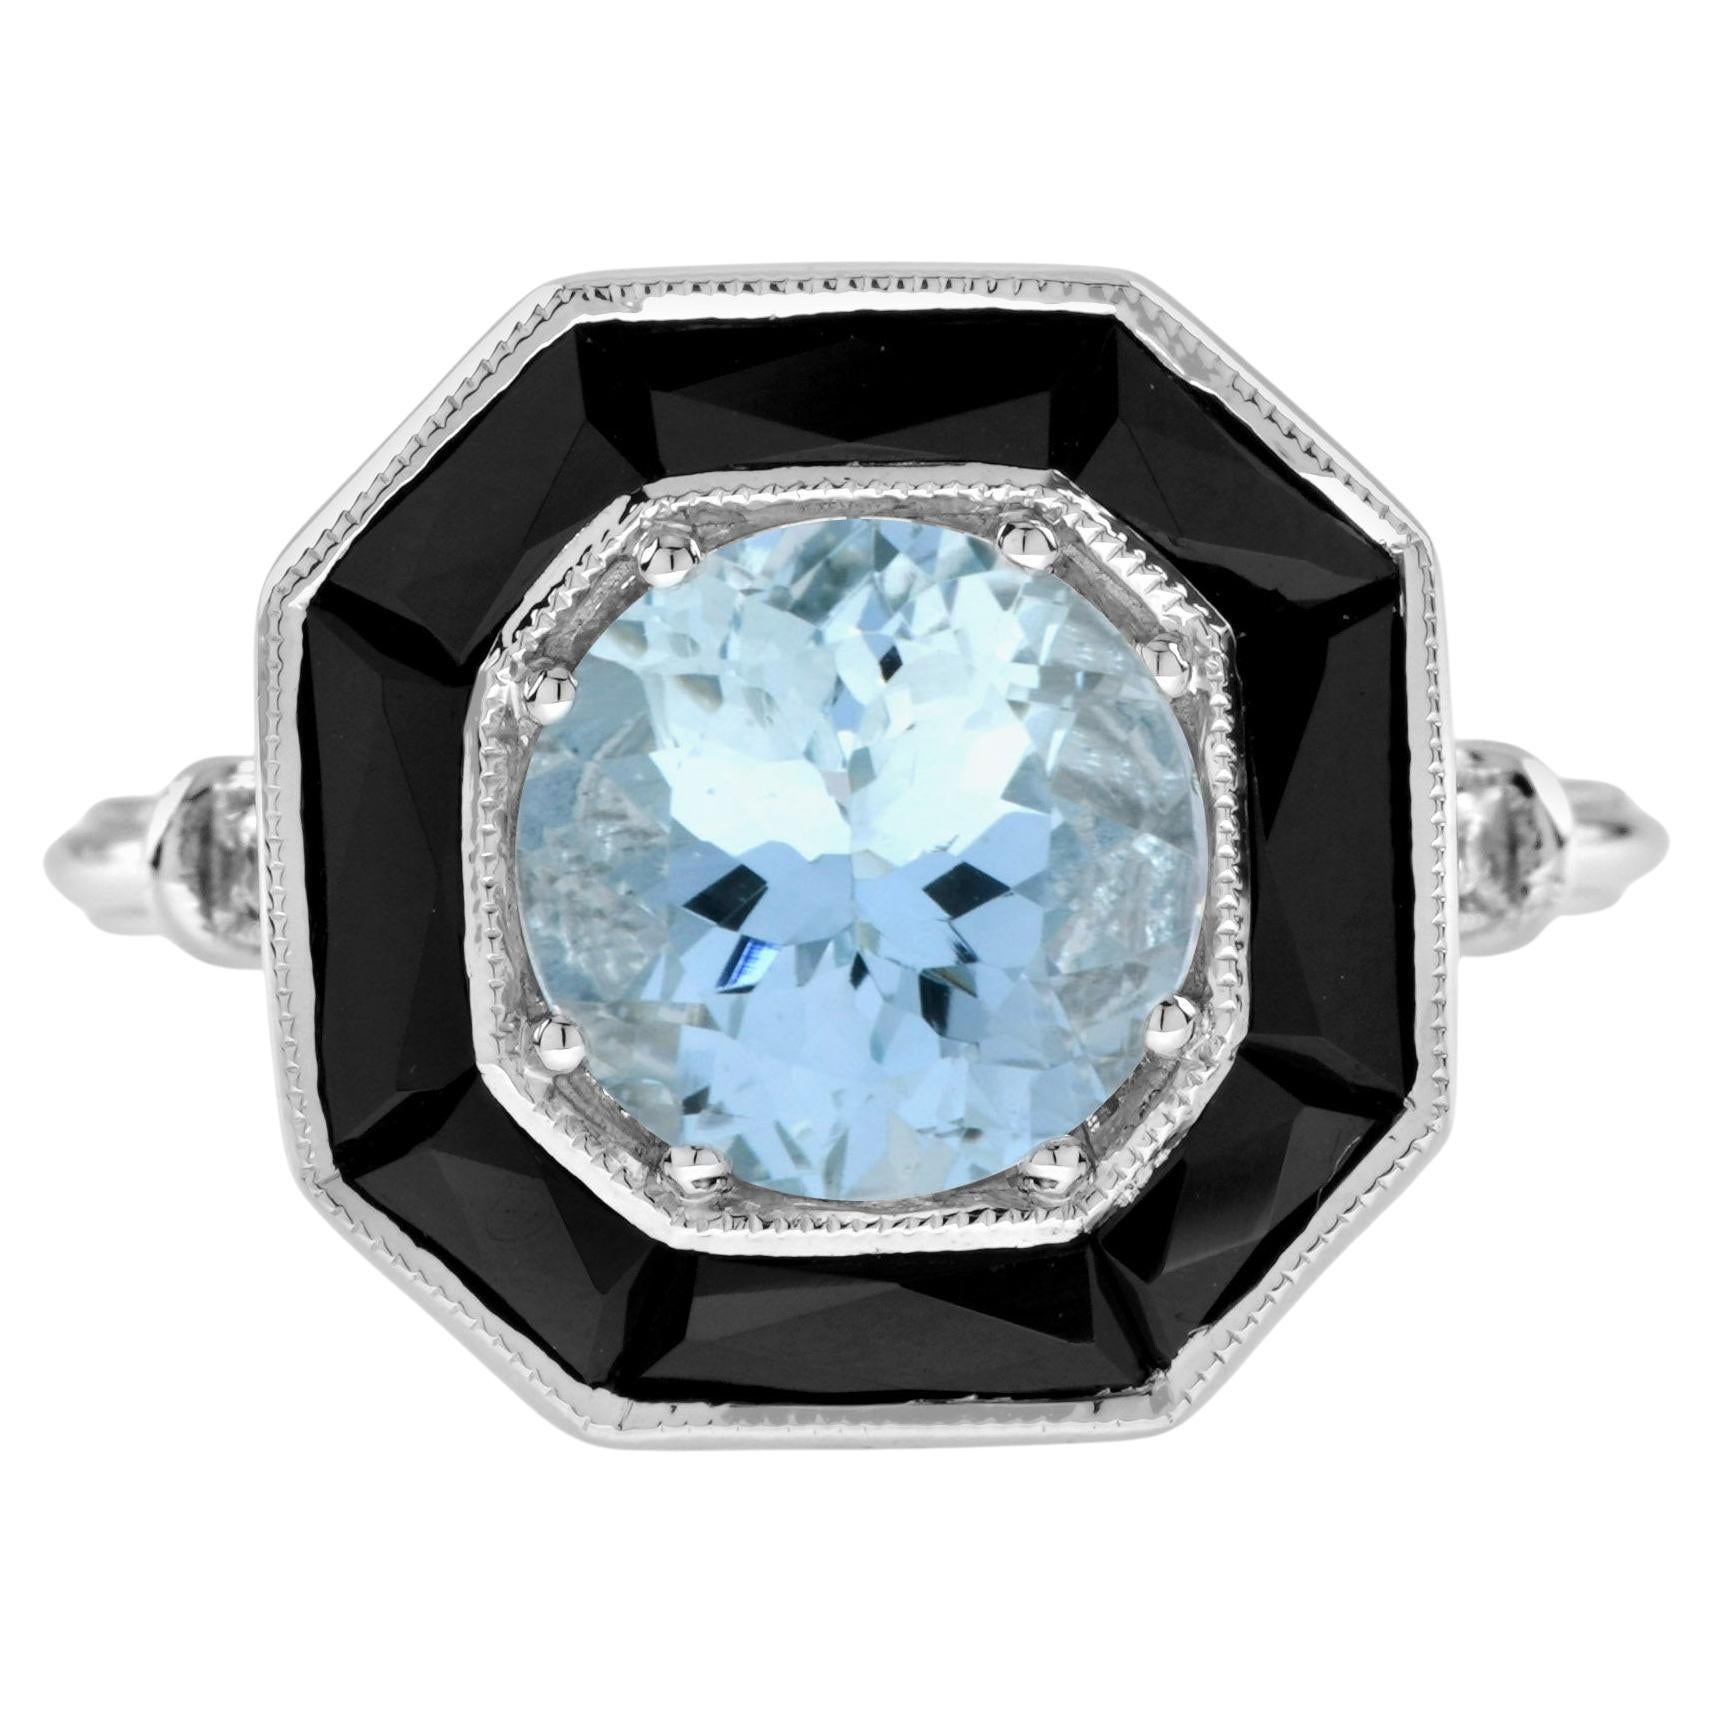 1.5 Ct. Aquamarine and Onyx Halo Art Deco Style Ring in 18K White Gold 